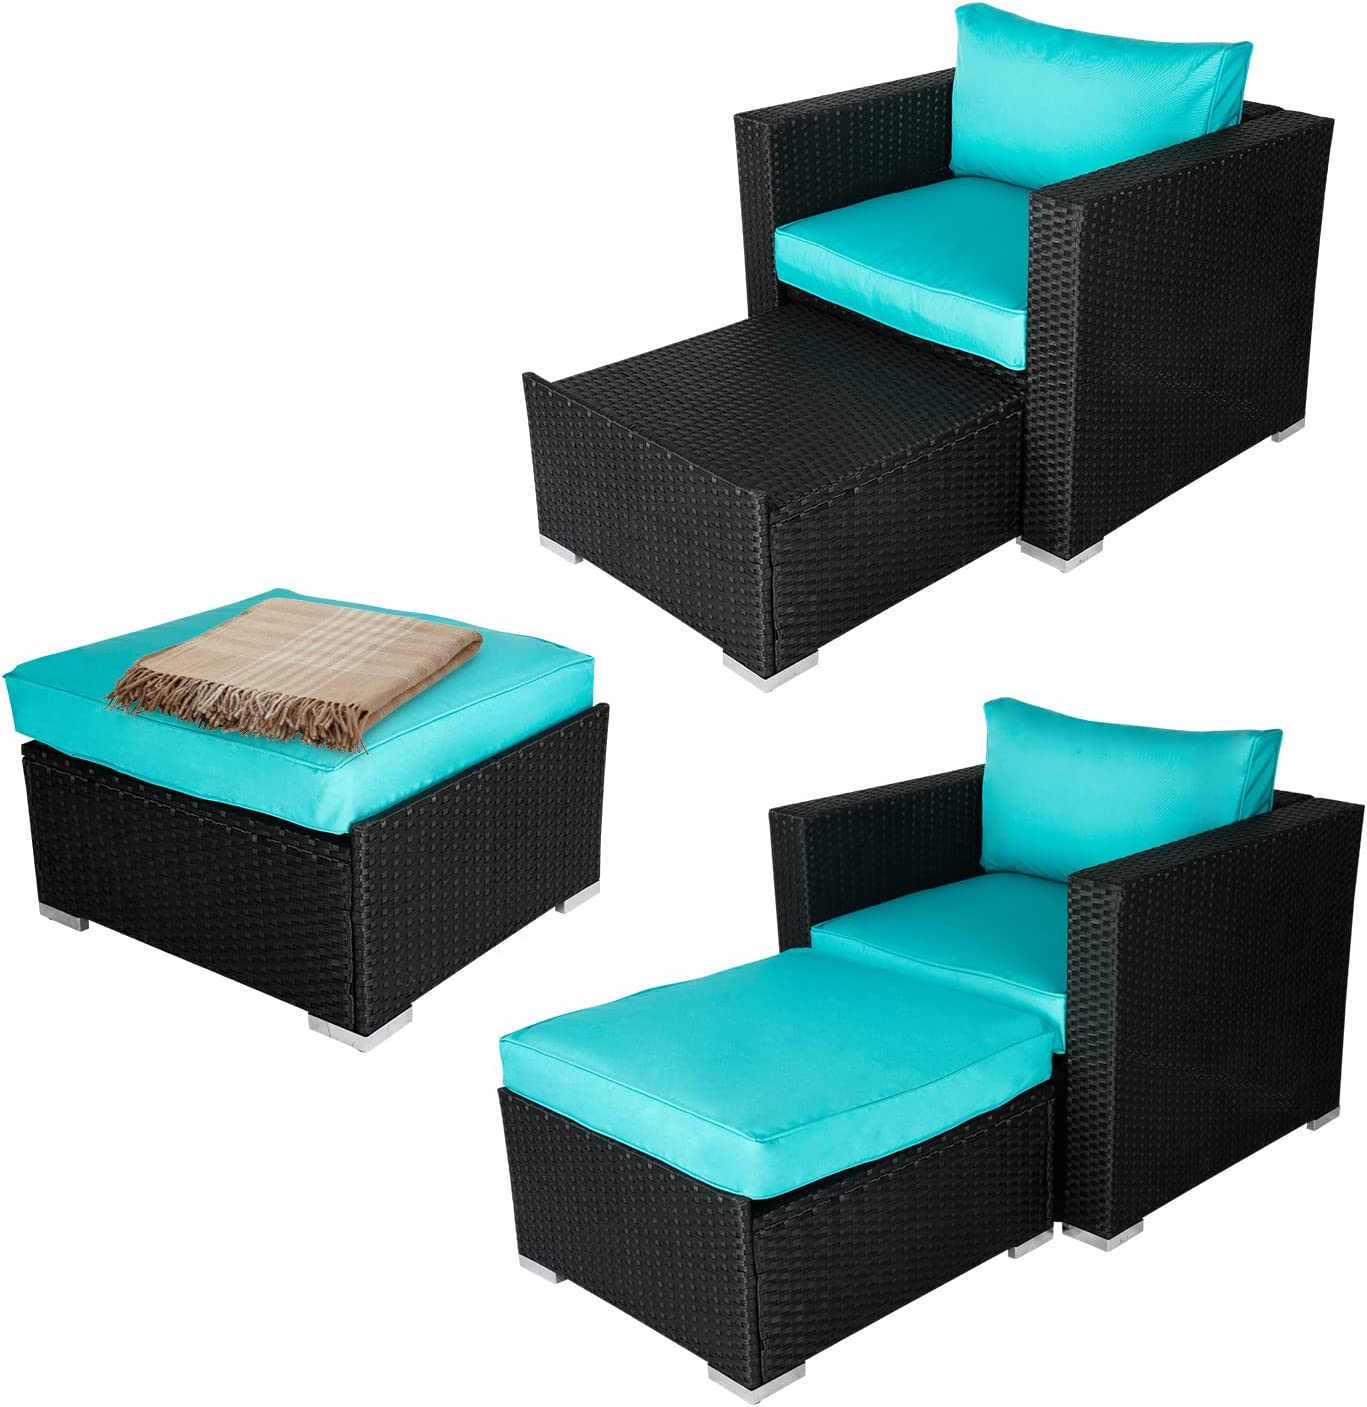 Kinbor 2pcs Outdoor Sofa Furniture PE Wicker Lounge Chair with Ottoman Sectional Conversation Set, Wicker Patio Sofa Sets, Blue - image 5 of 7